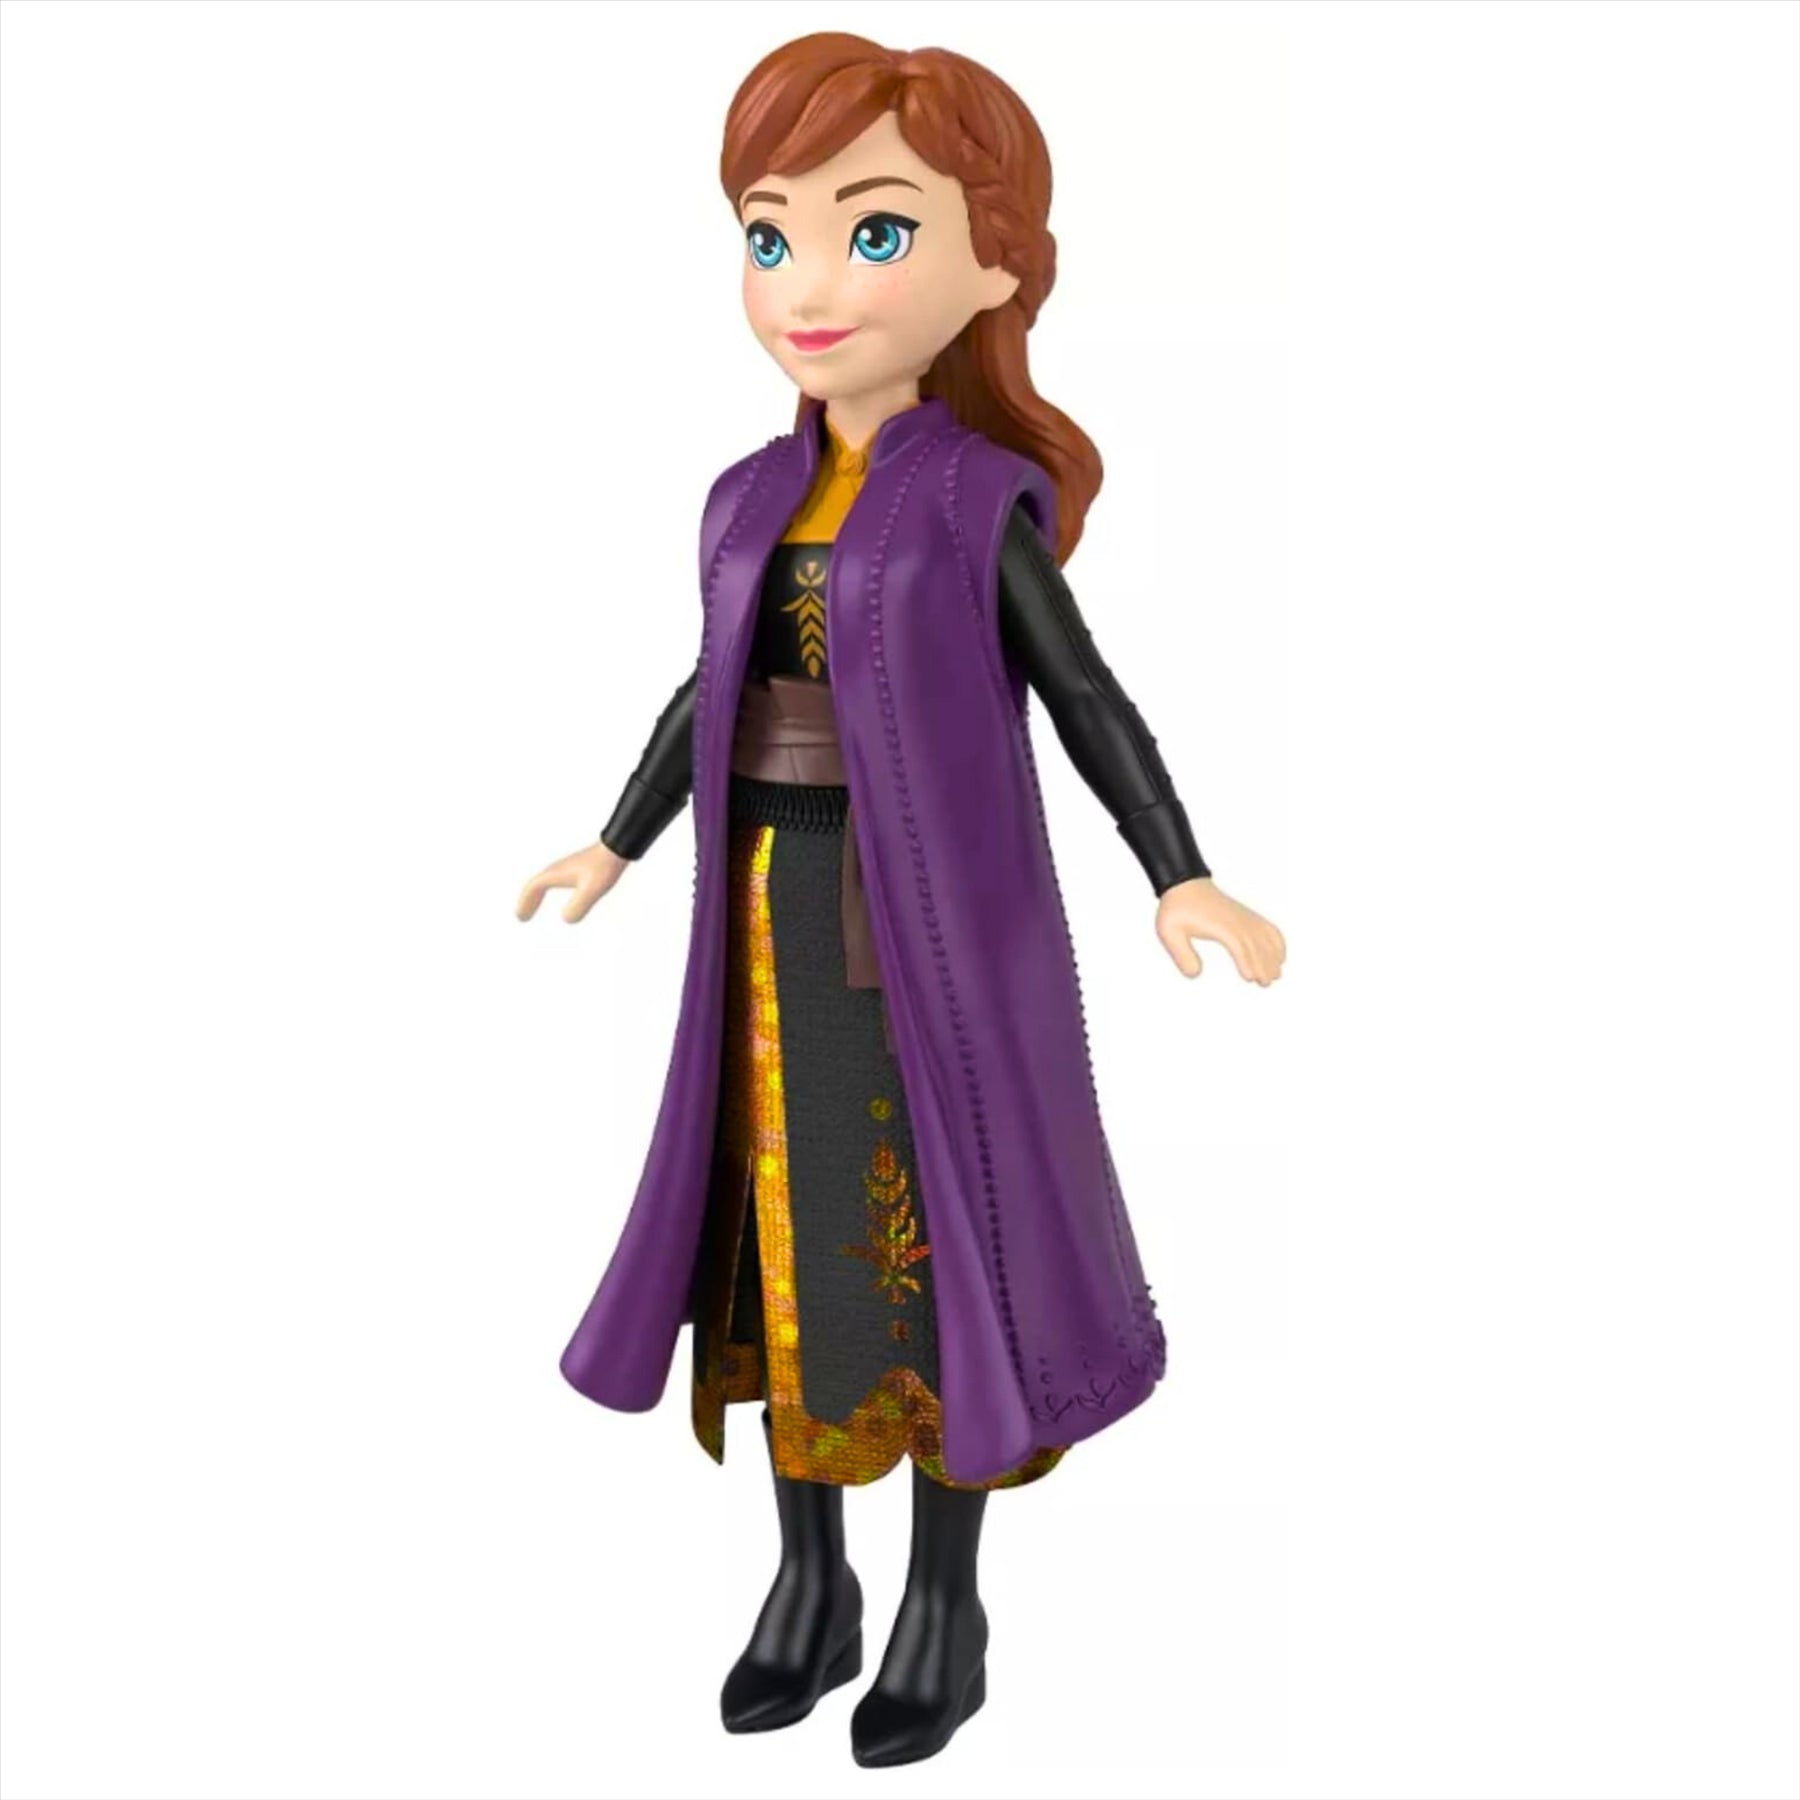 Disney Frozen Anna 10cm Articulated Action Figure Play Toy - Toptoys2u